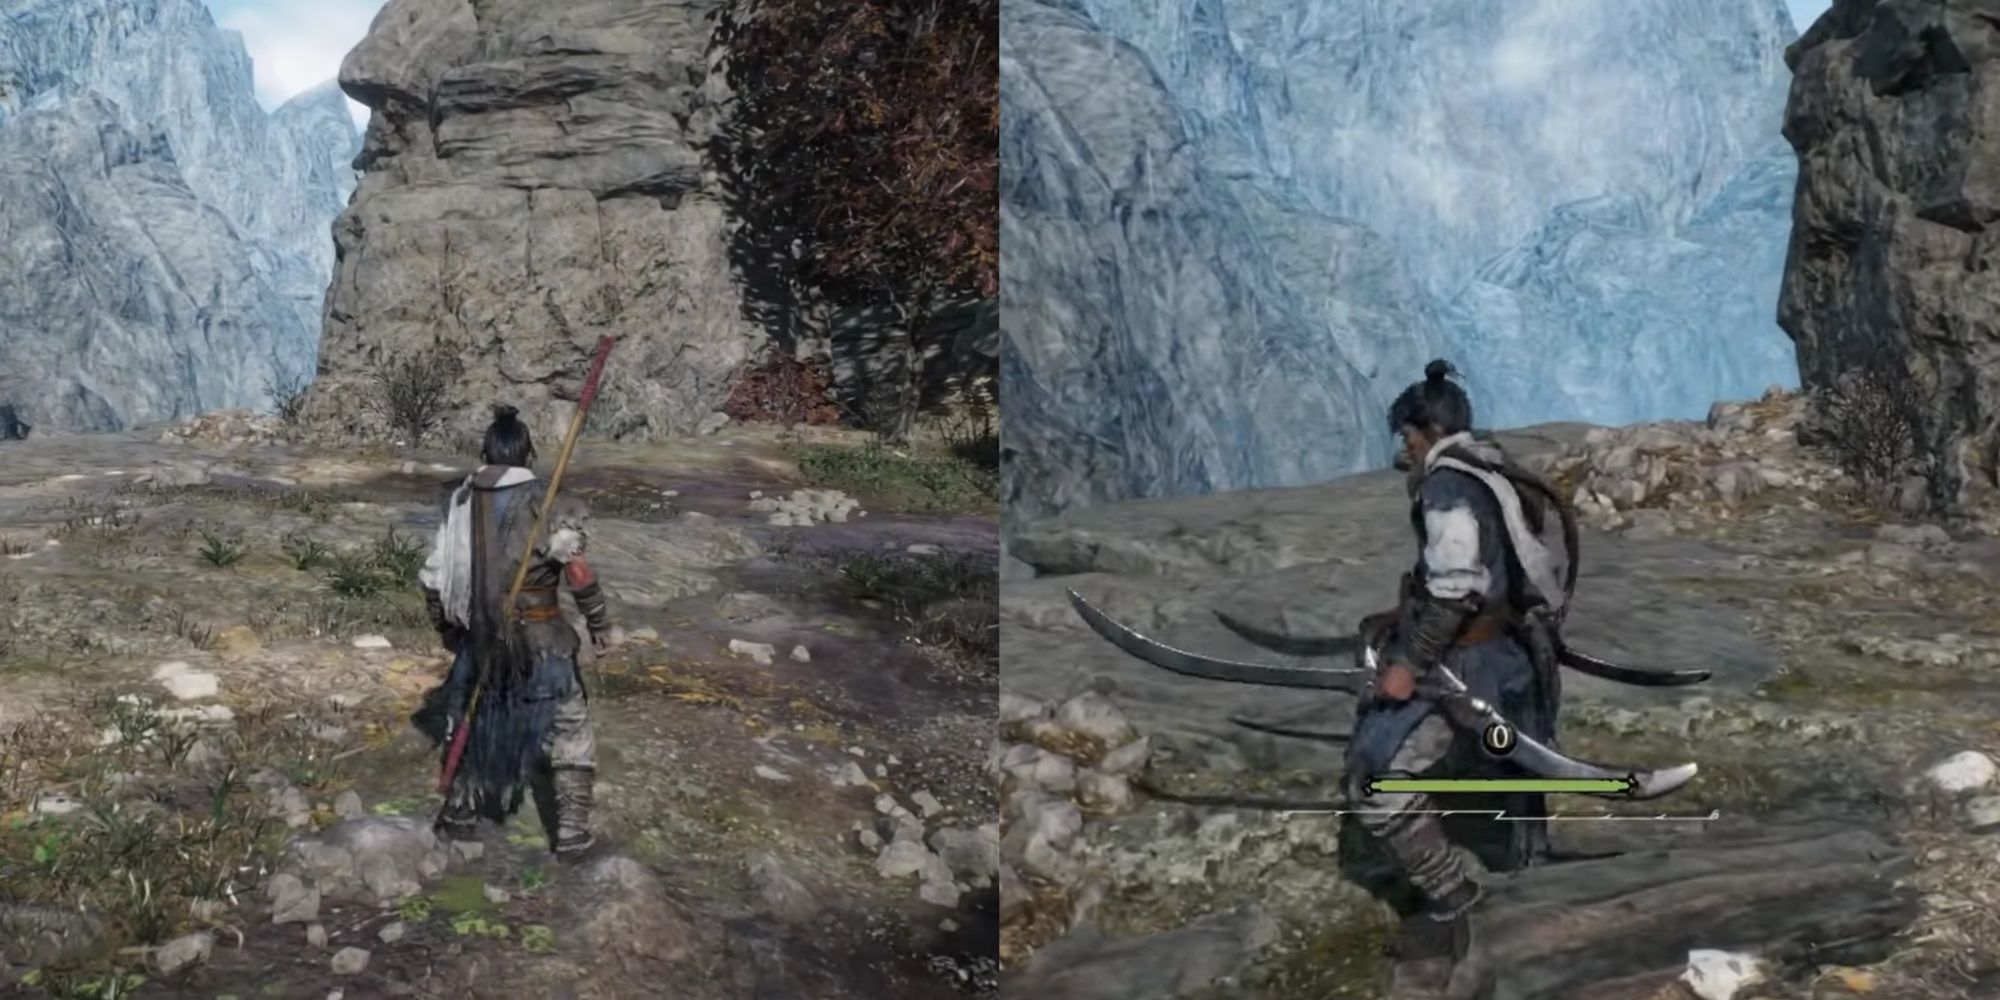 Wo Long Fallen Dynasty screenshots of the main character wielding a staff (left) and dual sabers (right).